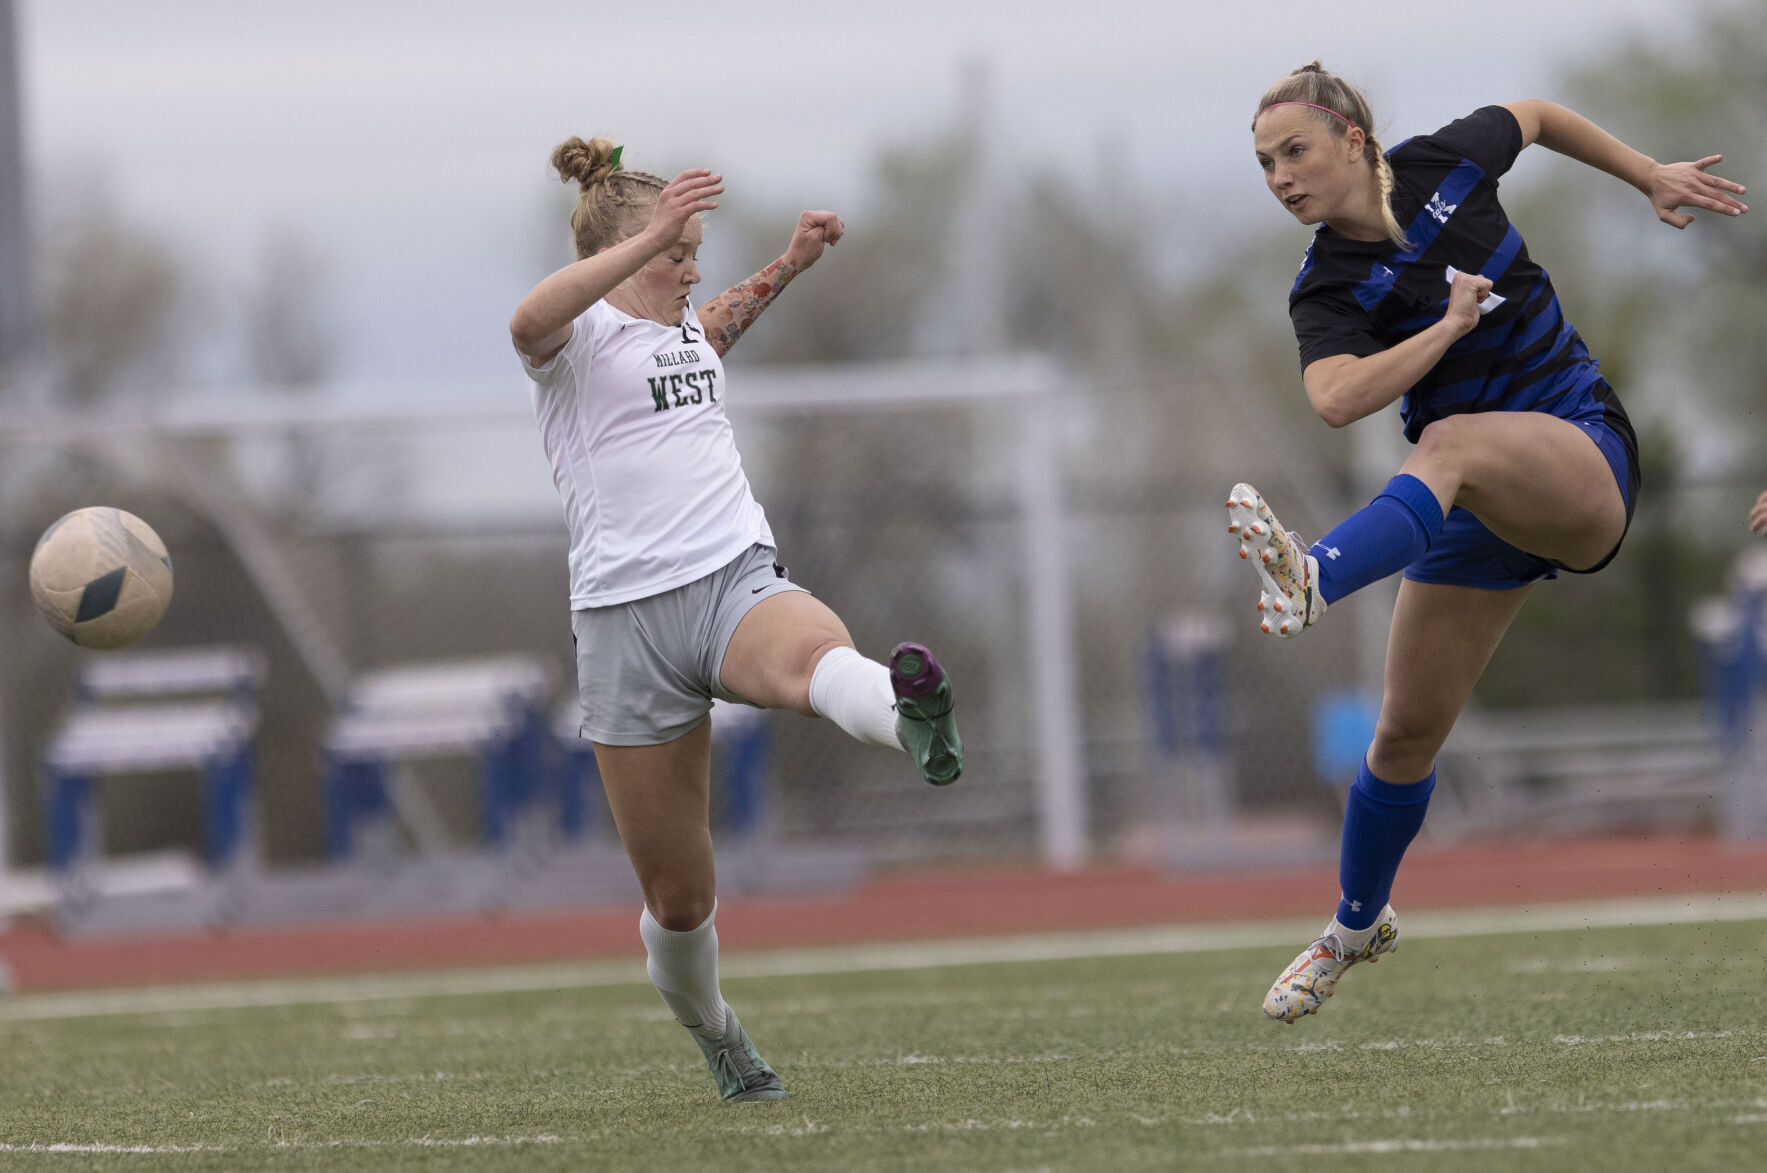 Kearney High’s Road to State: Penalty Shootout Drama & Defensive Triumphs